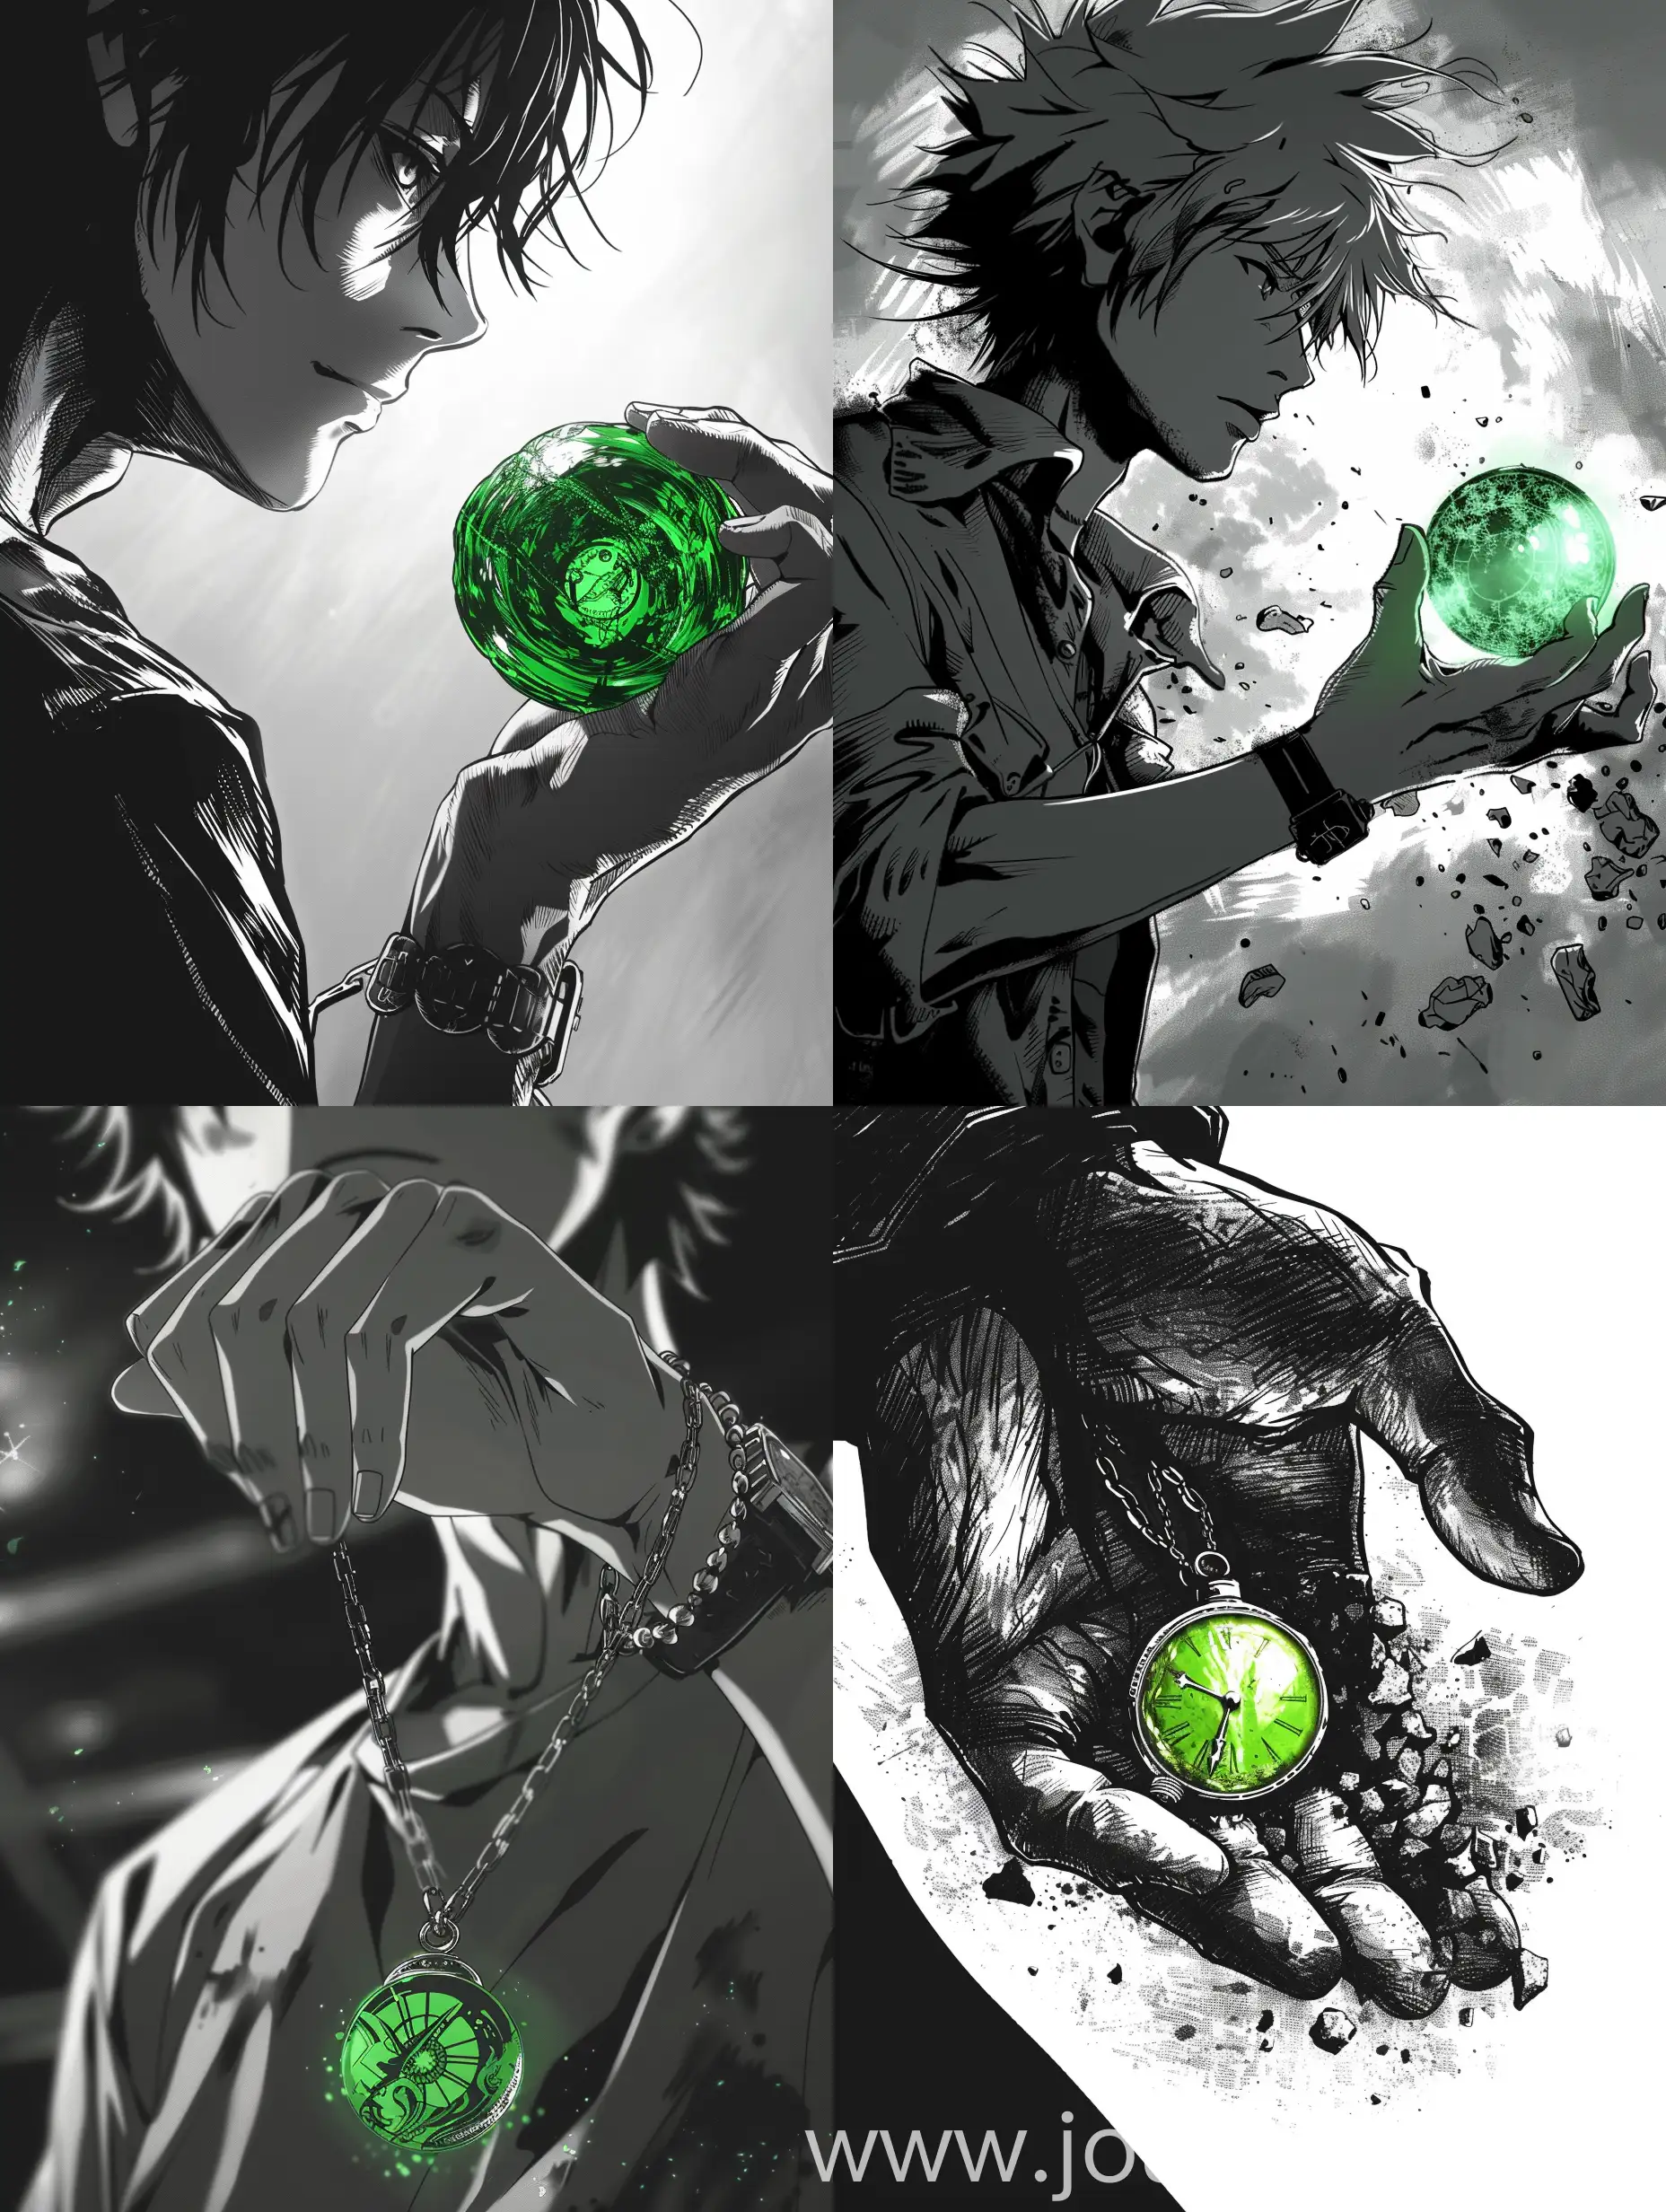 The green time amulet in the guy's hand, manga style, black and white.